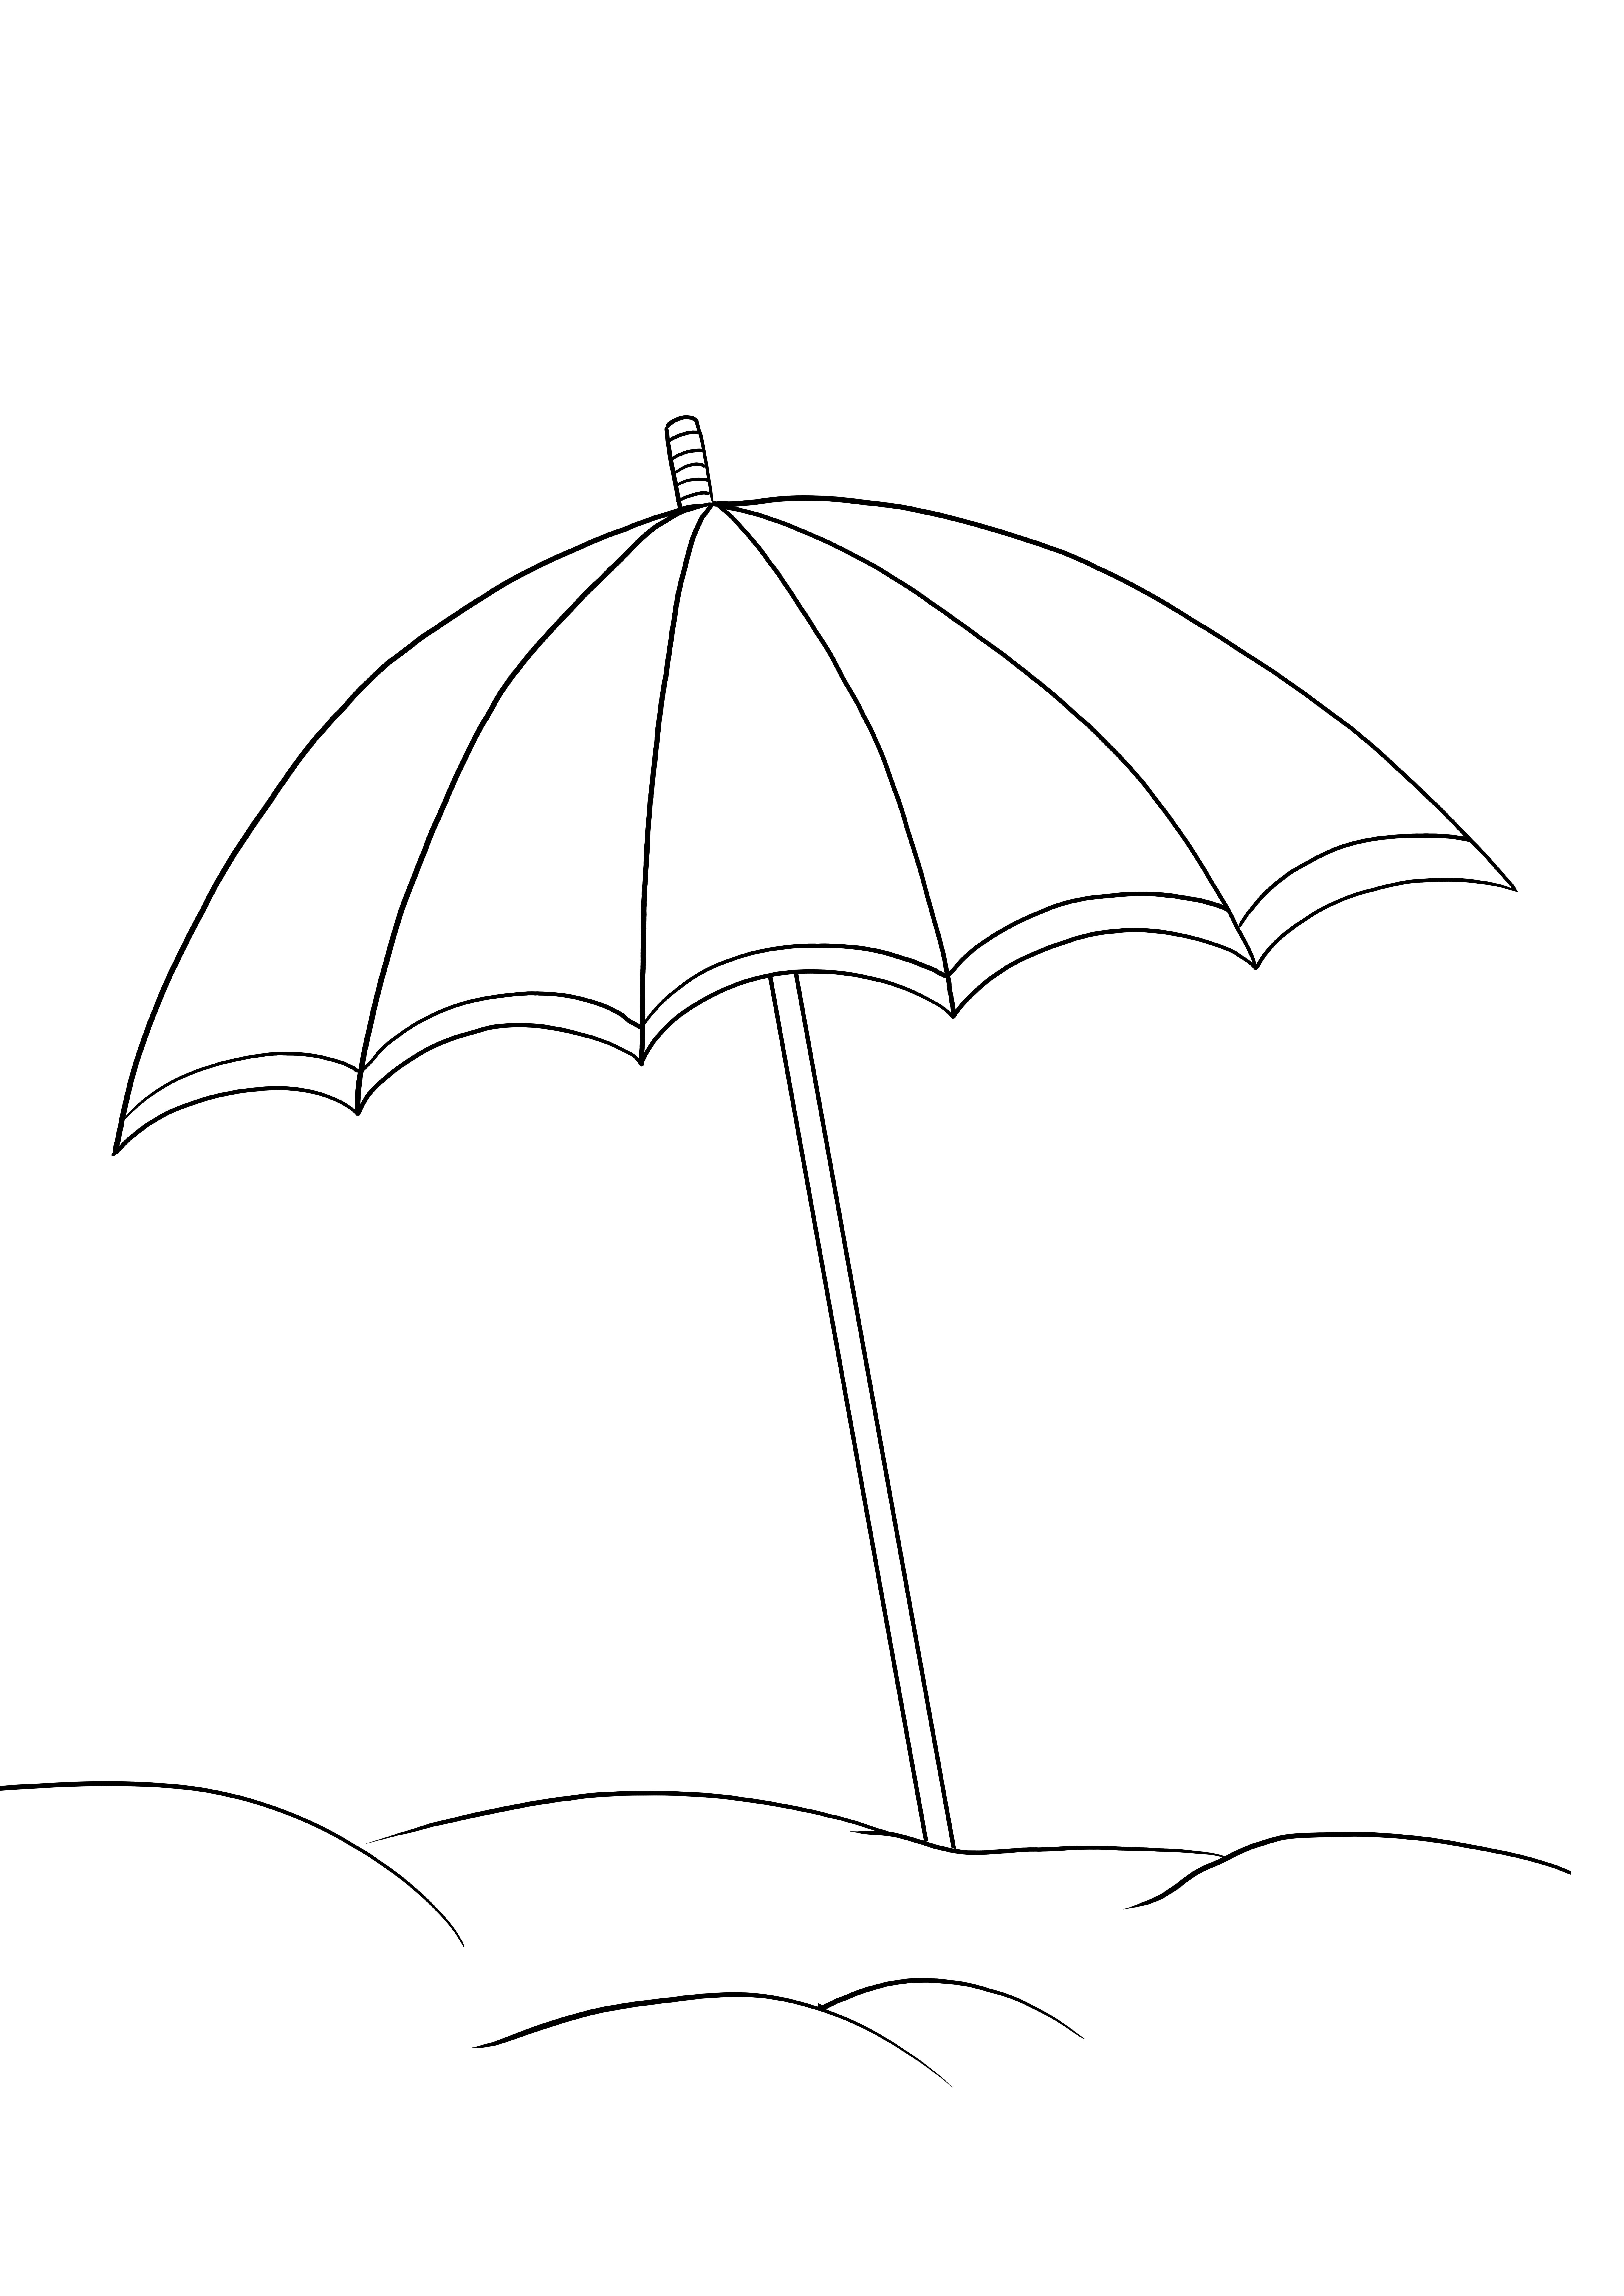 Beach umbrella easy coloring sheet for kids to have fun